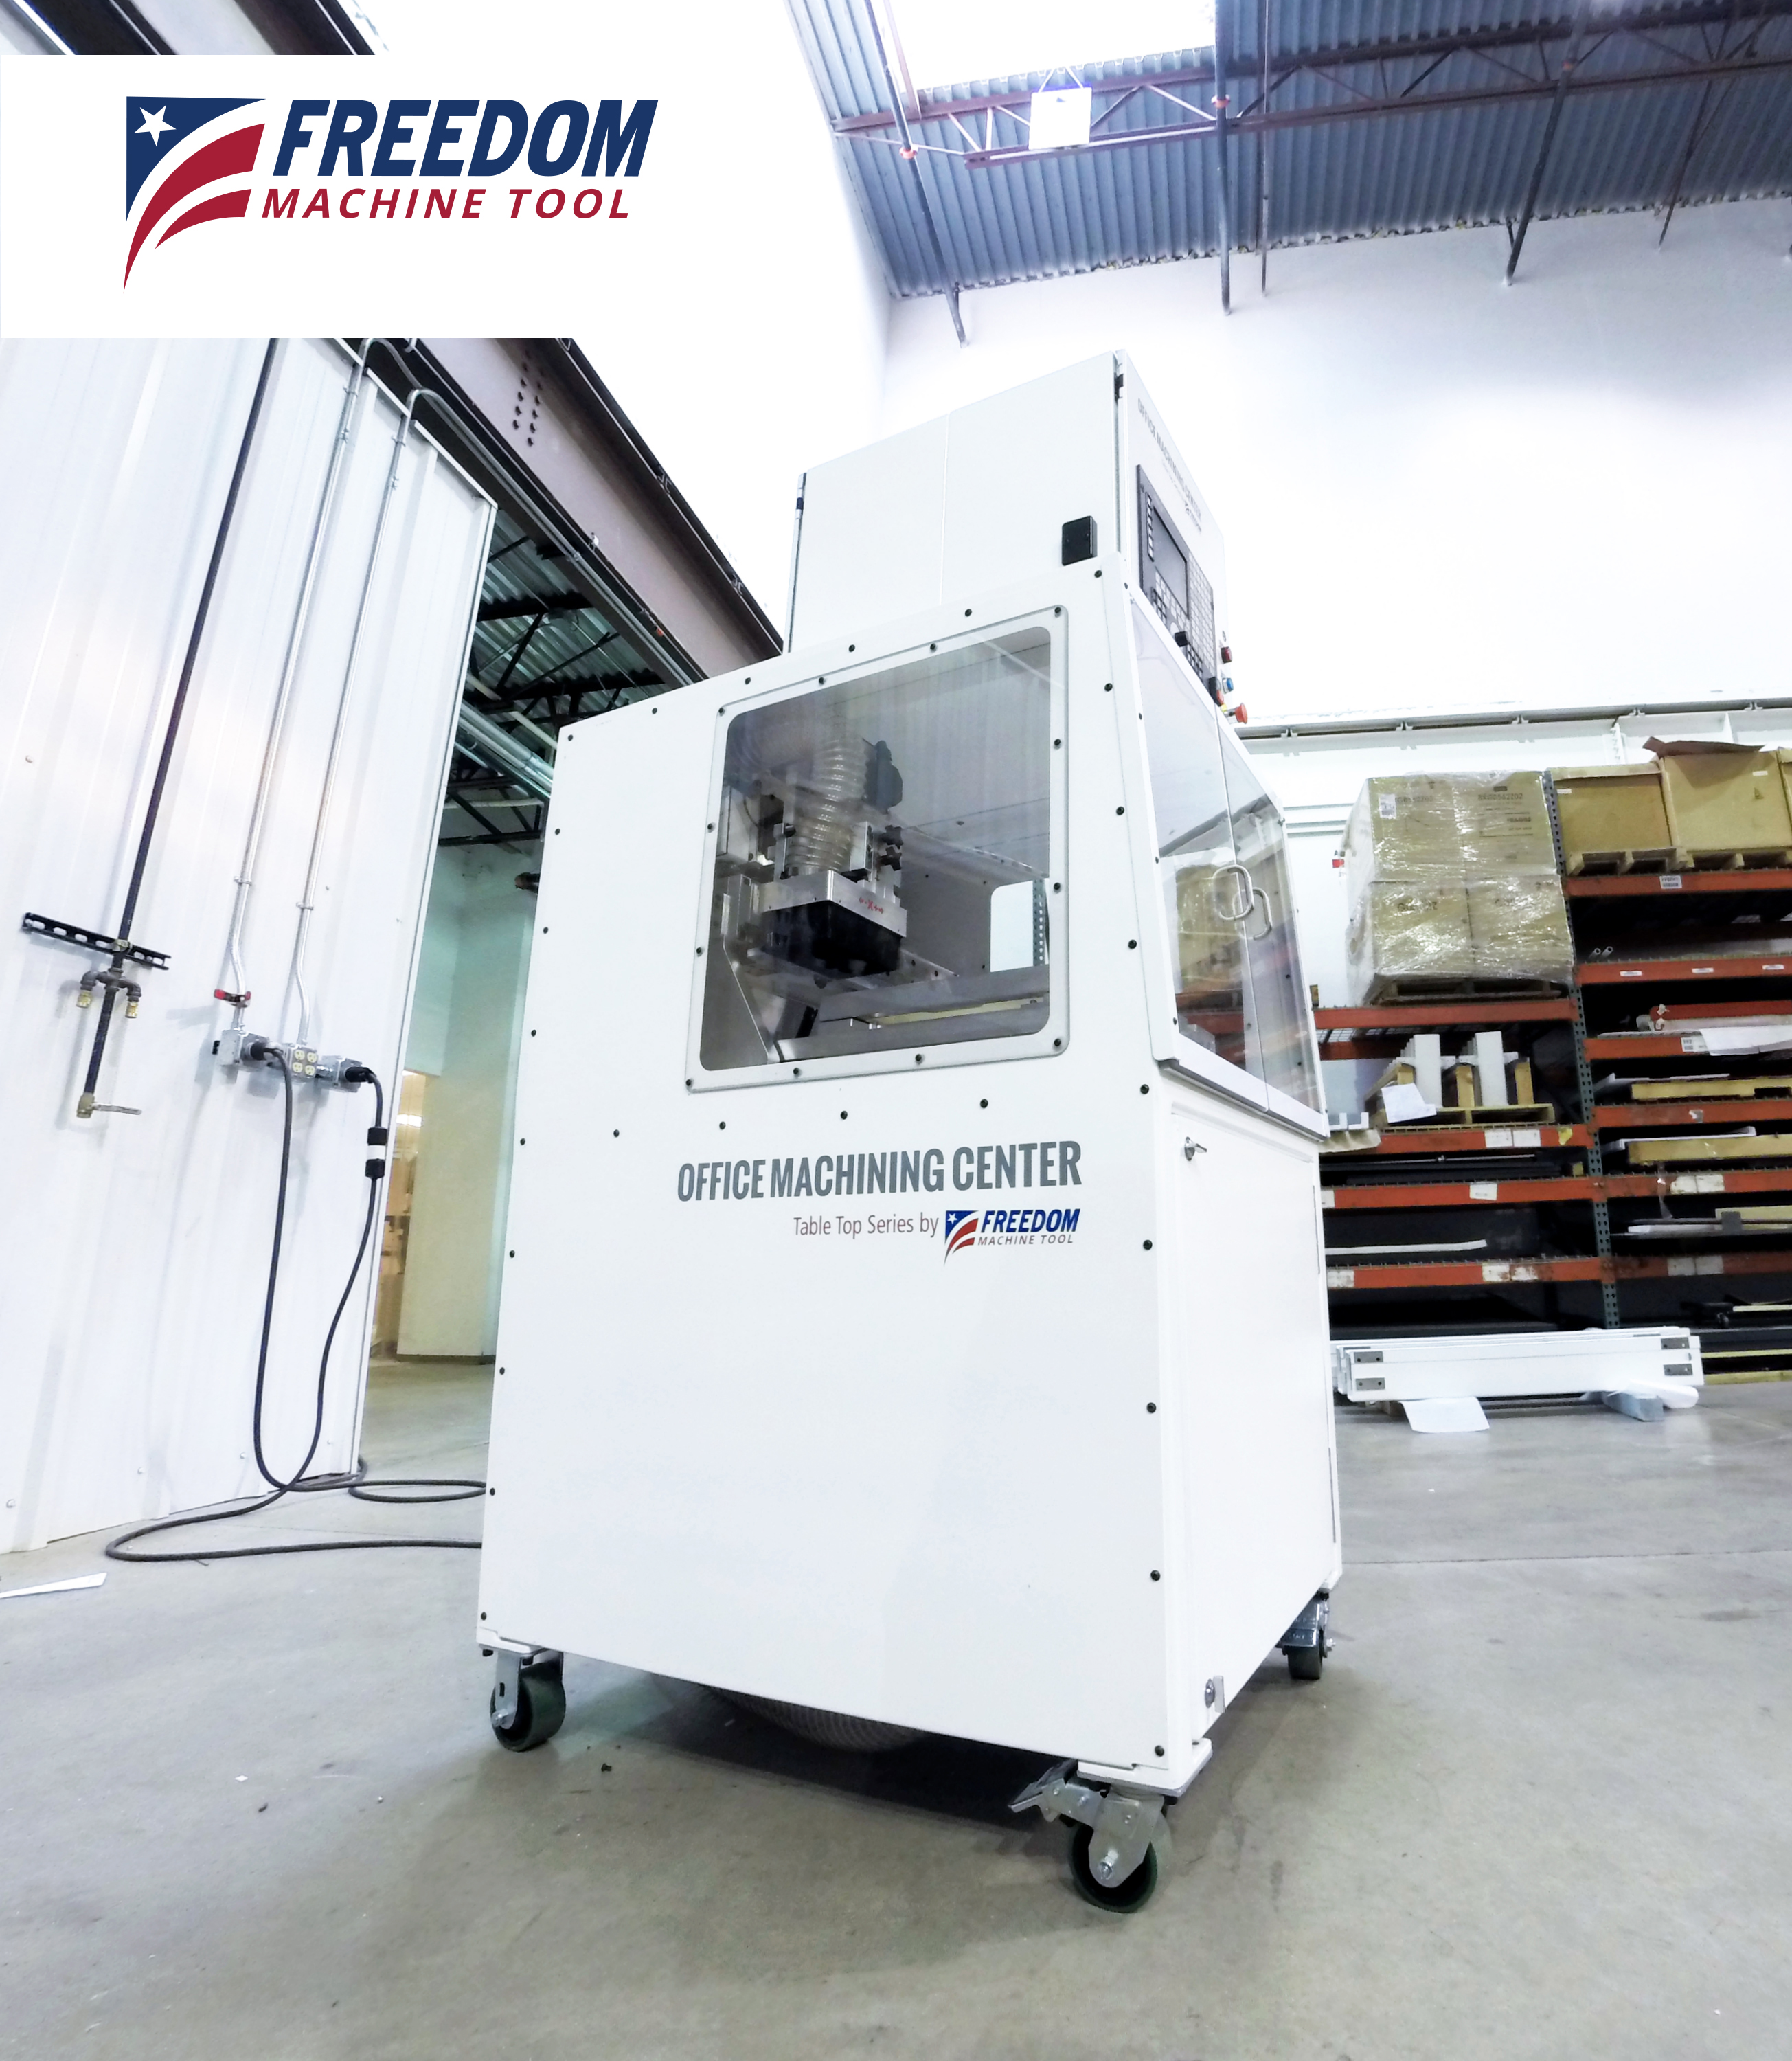 Freedom Machine Tool 3 Axis Office Machining Center